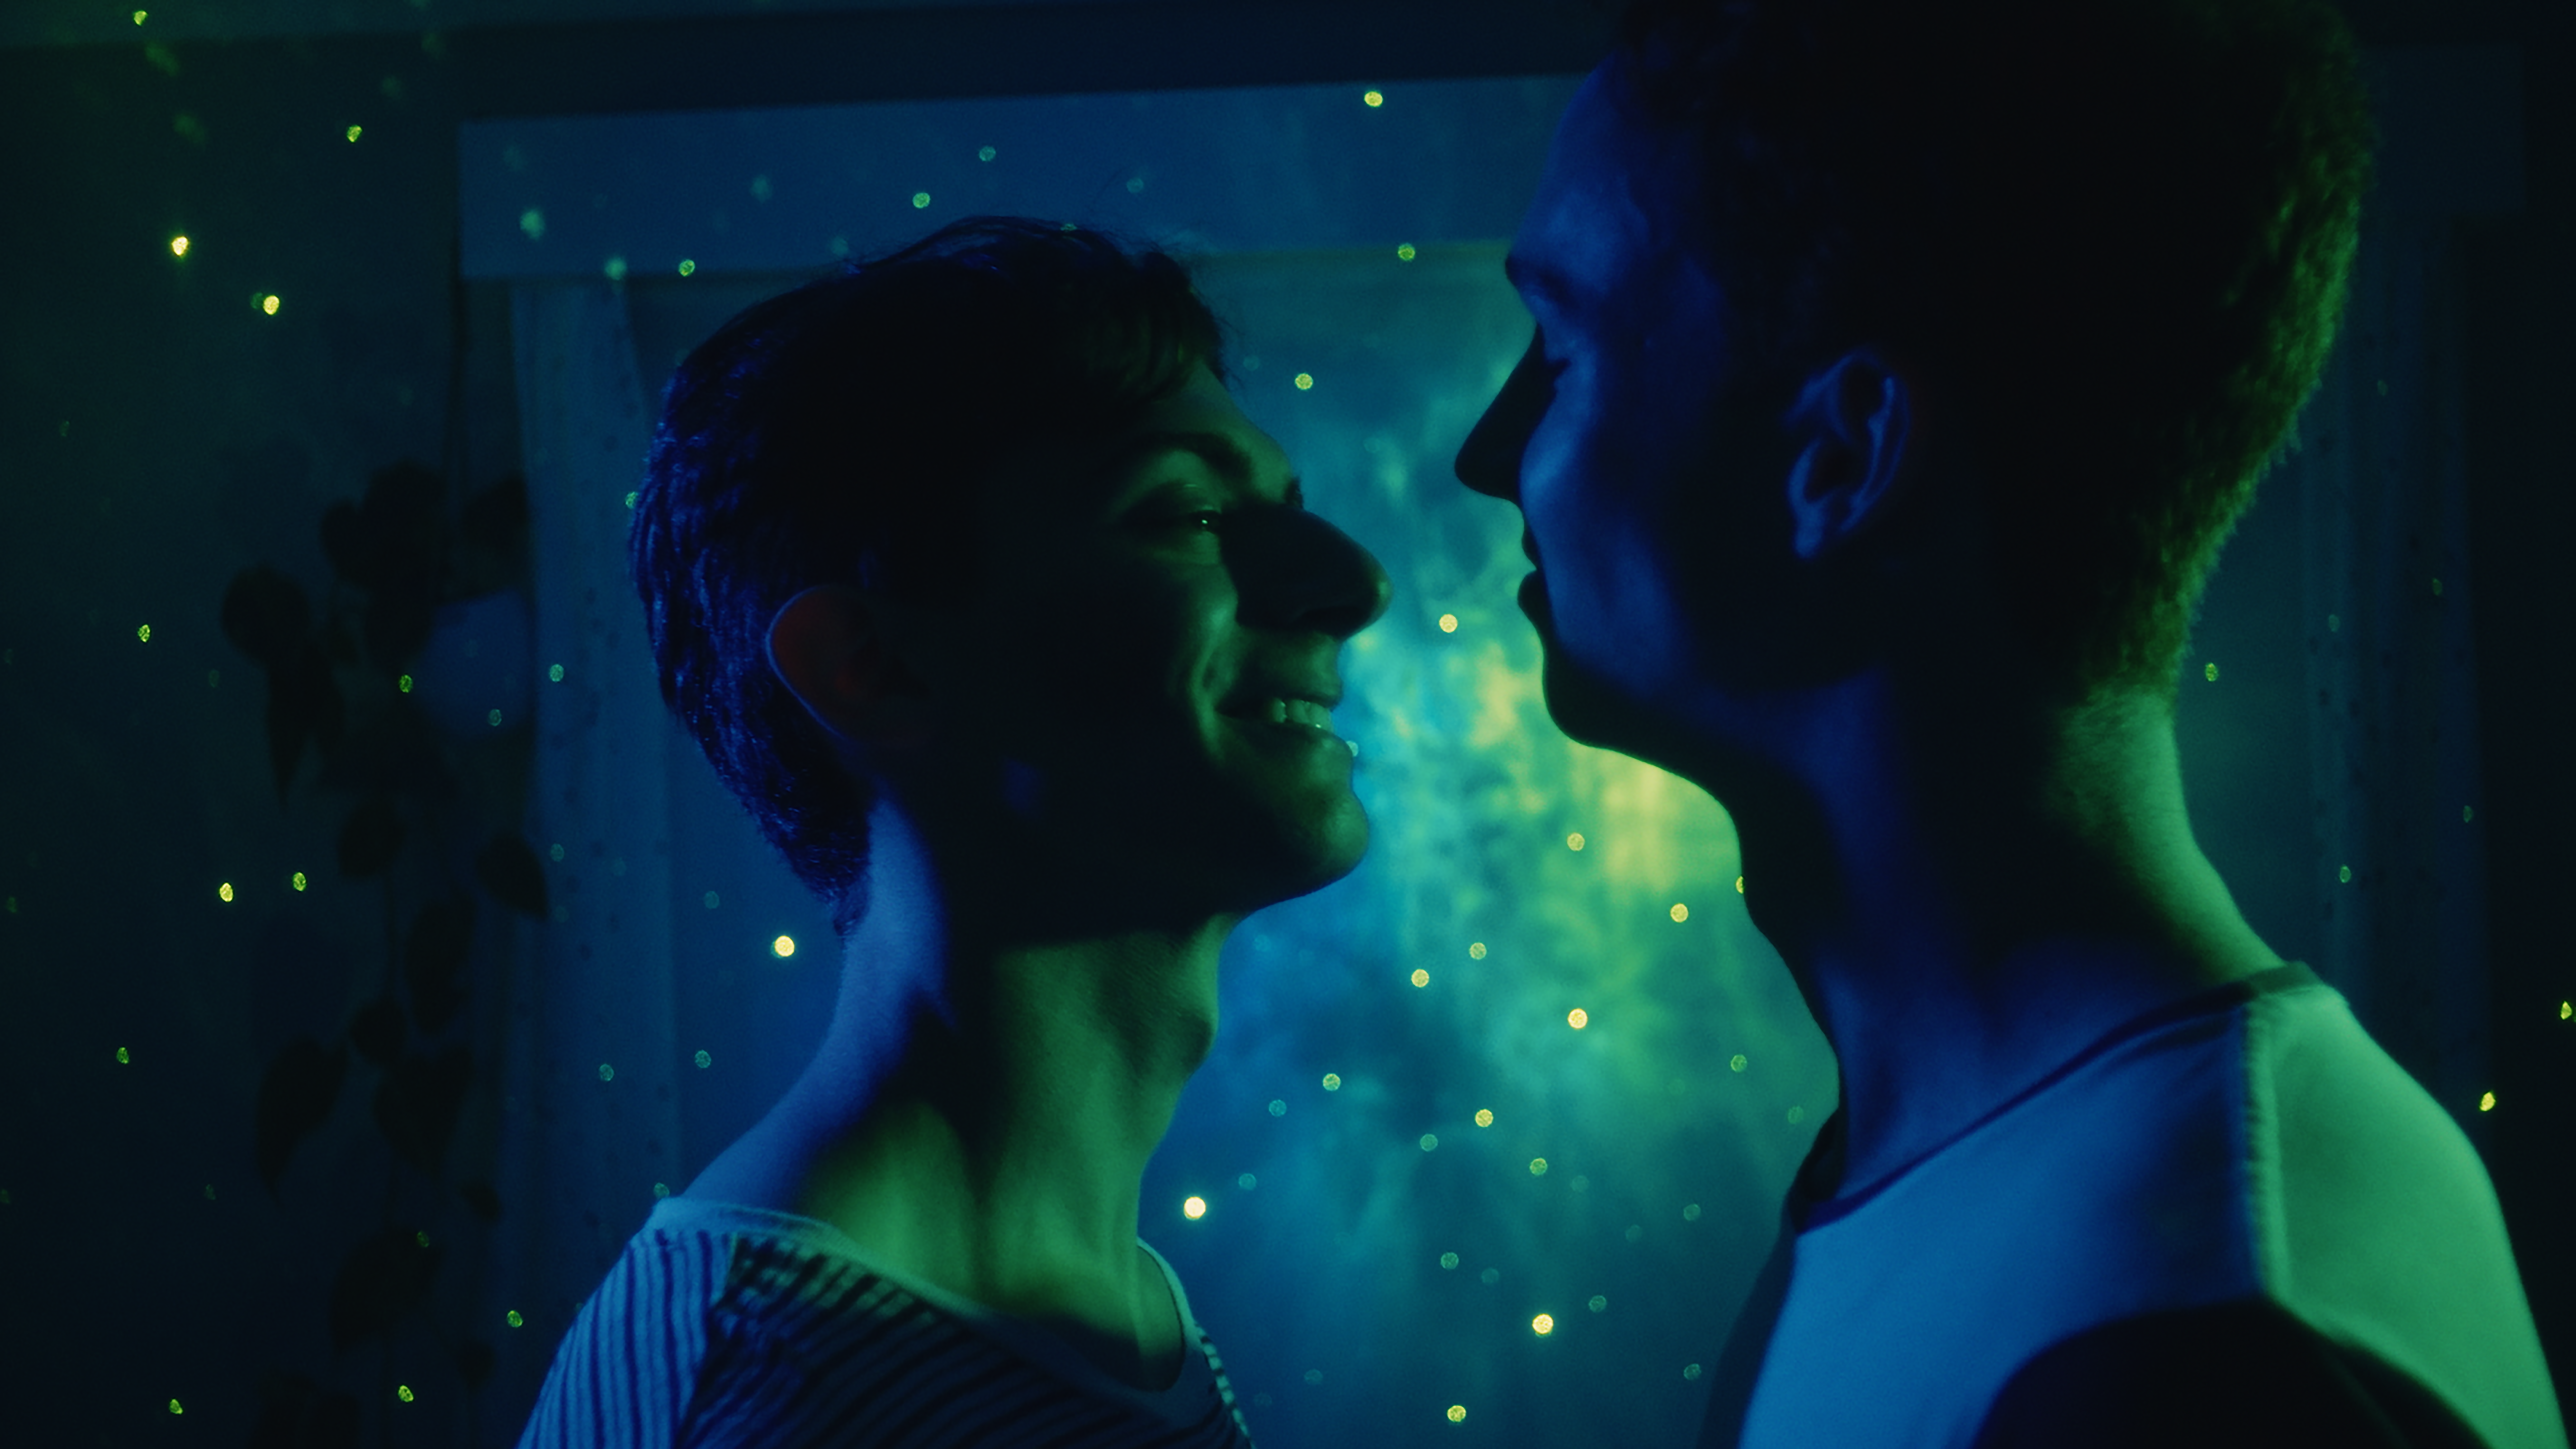 Two men smile as they look into each other's eyes, bathed in green light